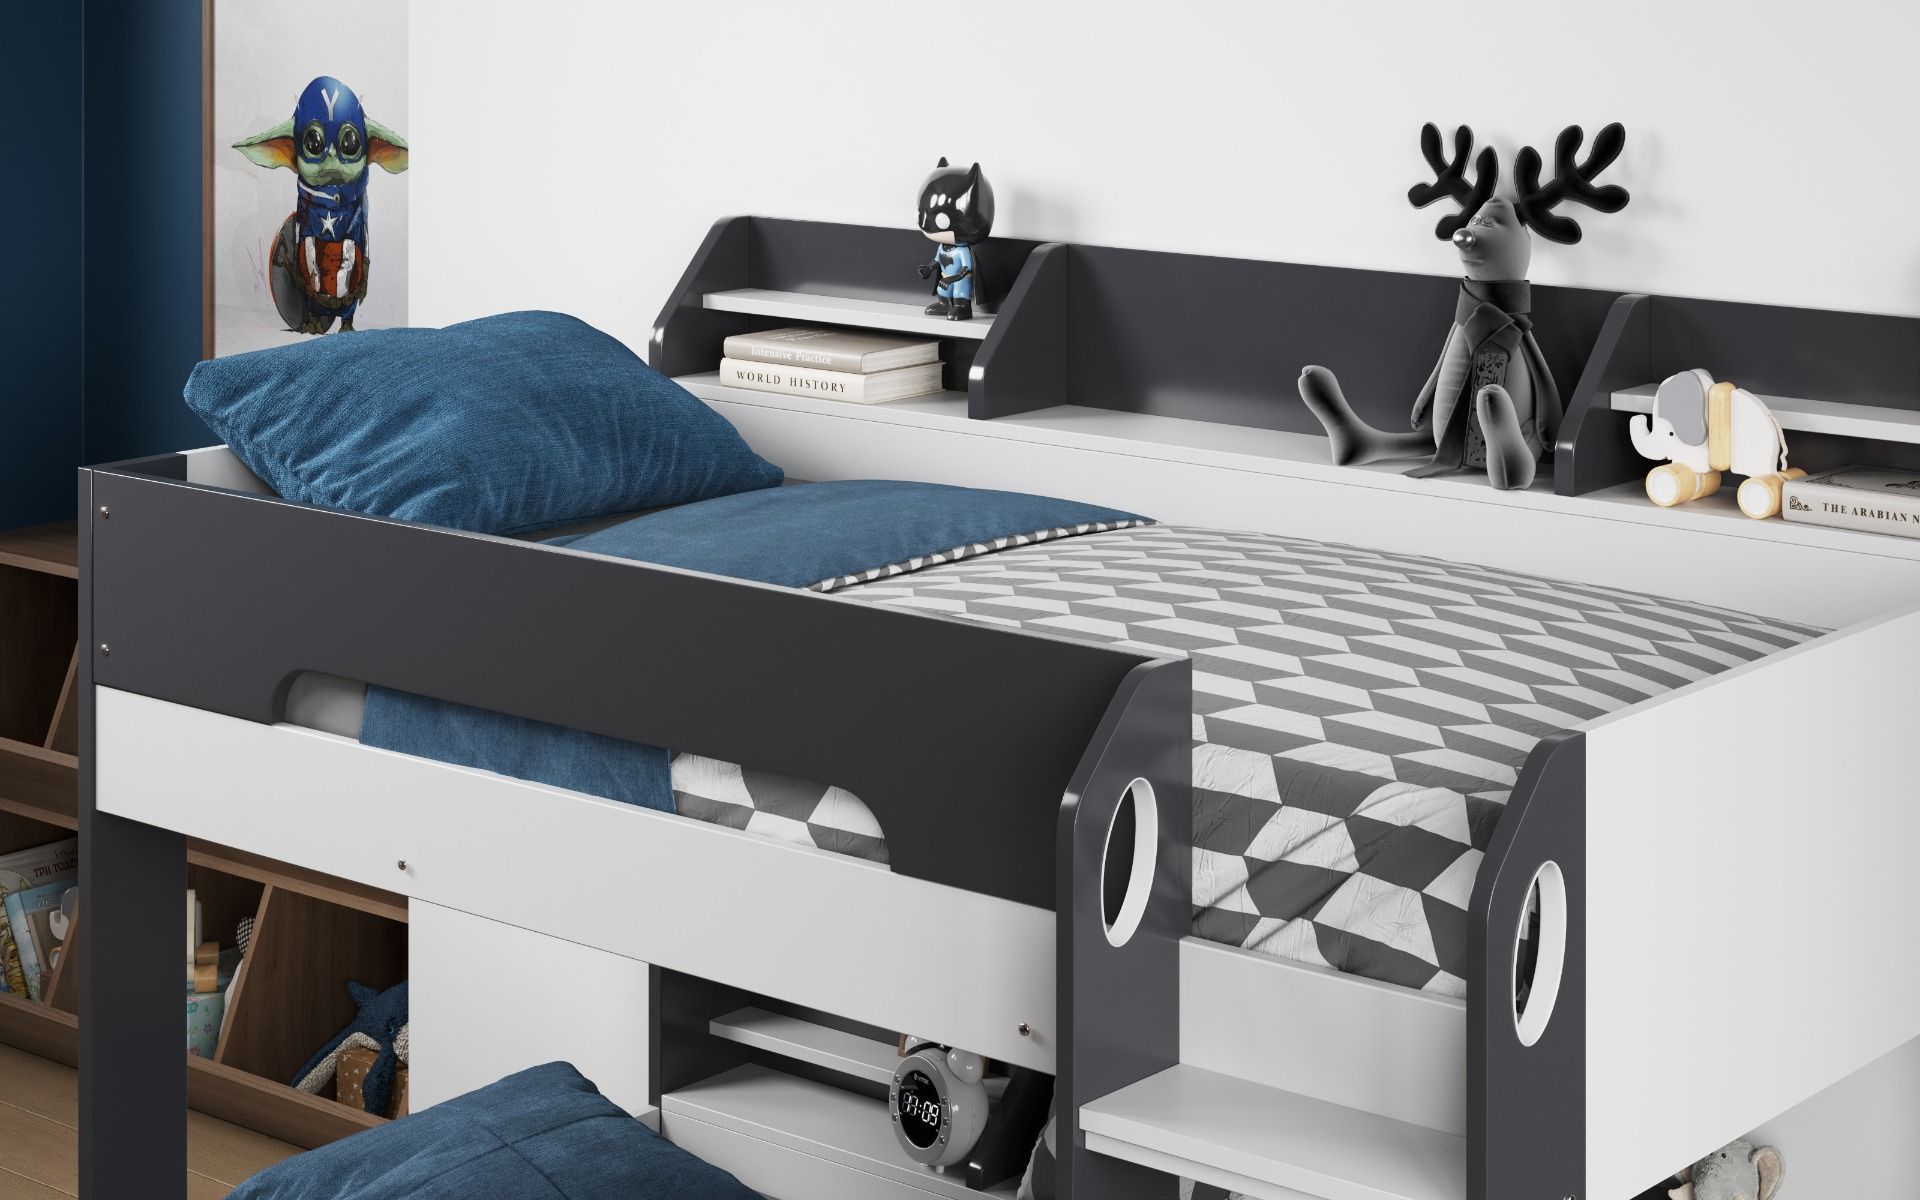 Flair Flick Bunk Bed with Shelves And Drawer - Grey